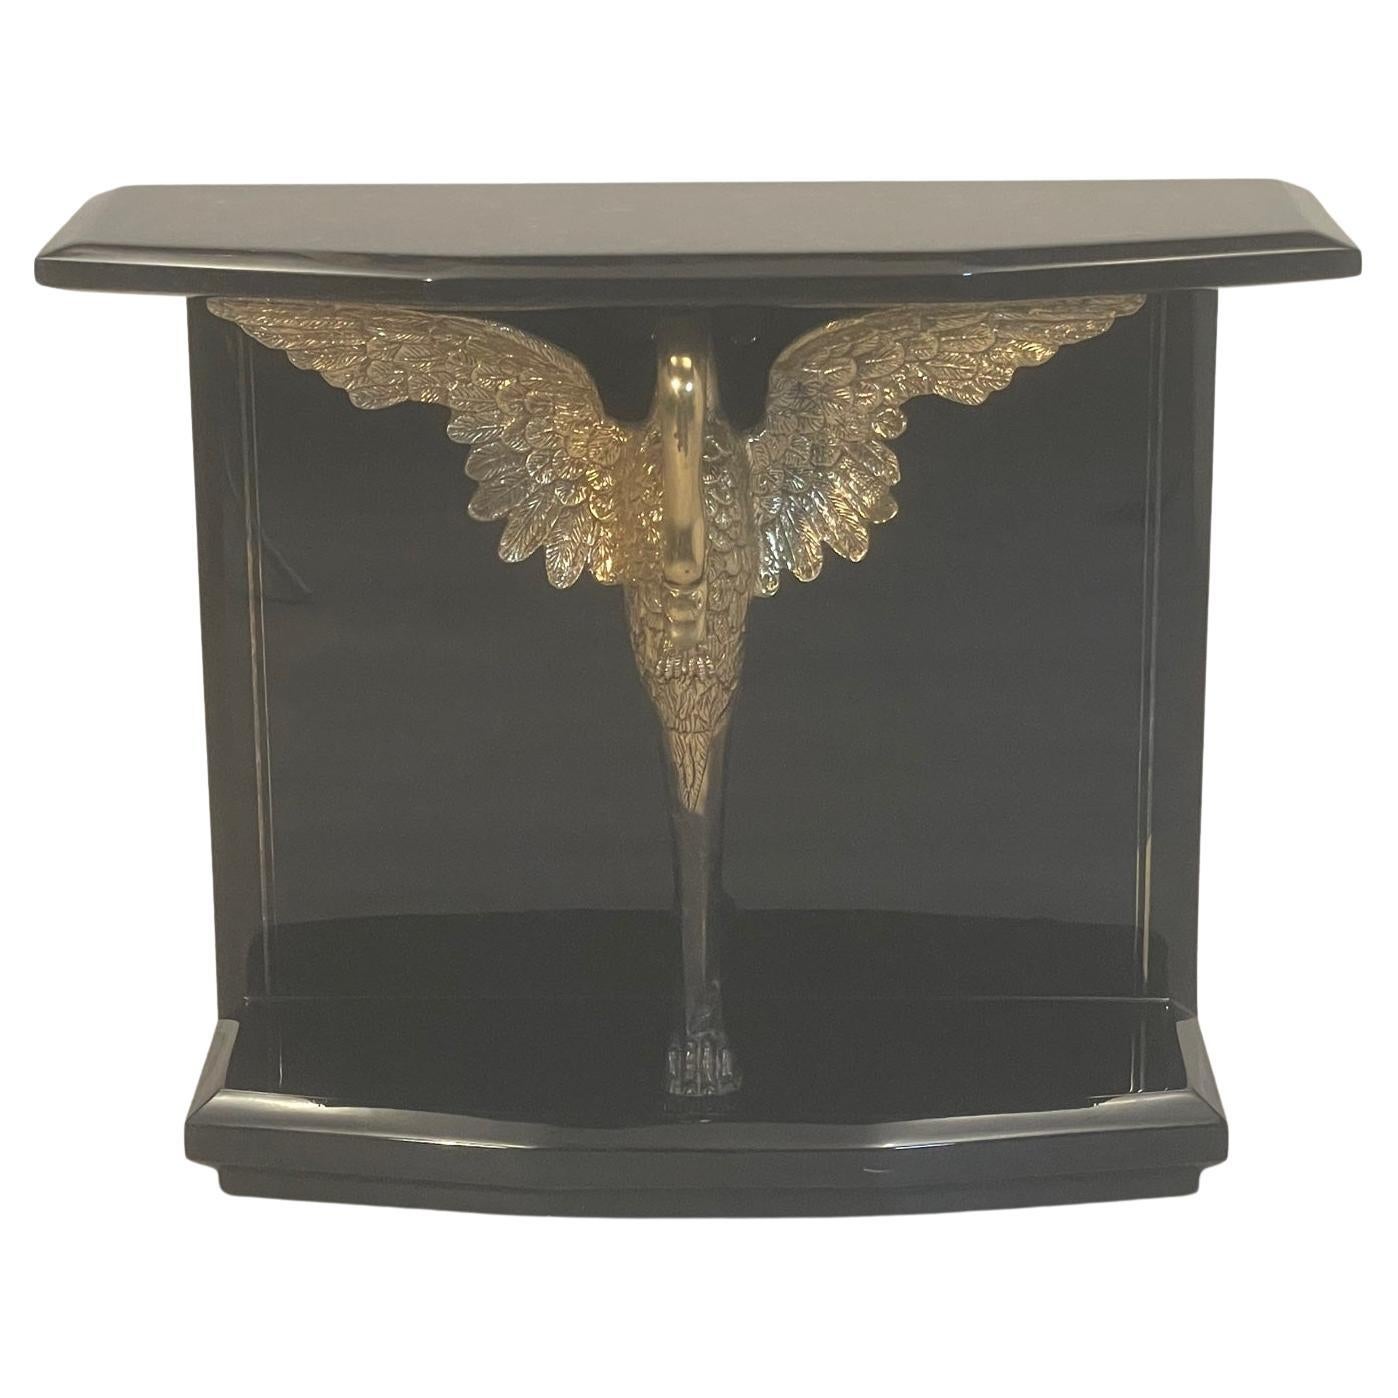 Outstanding Enrique Garcia Black Laquer Coconut Shell Console with Brass Swan For Sale